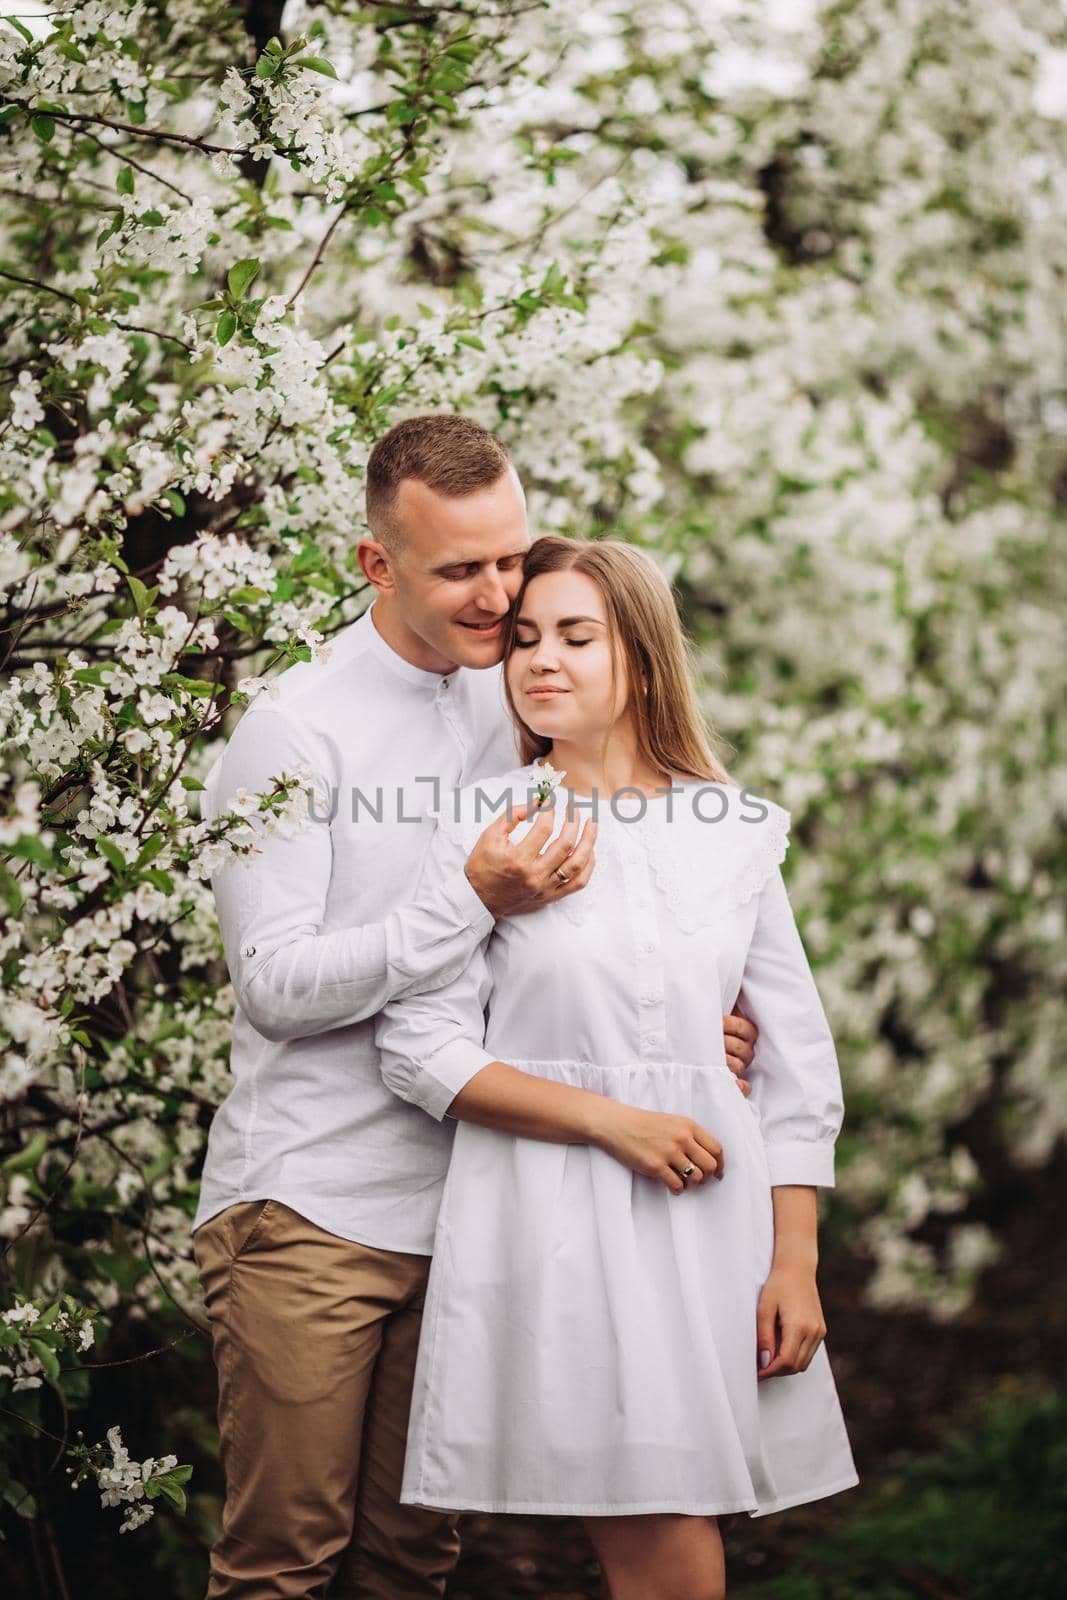 Happy family couple in love in a spring blooming apple orchard. Happy family enjoy each other while walking in the garden. The man holds the woman's hand. Family relationships by Dmitrytph